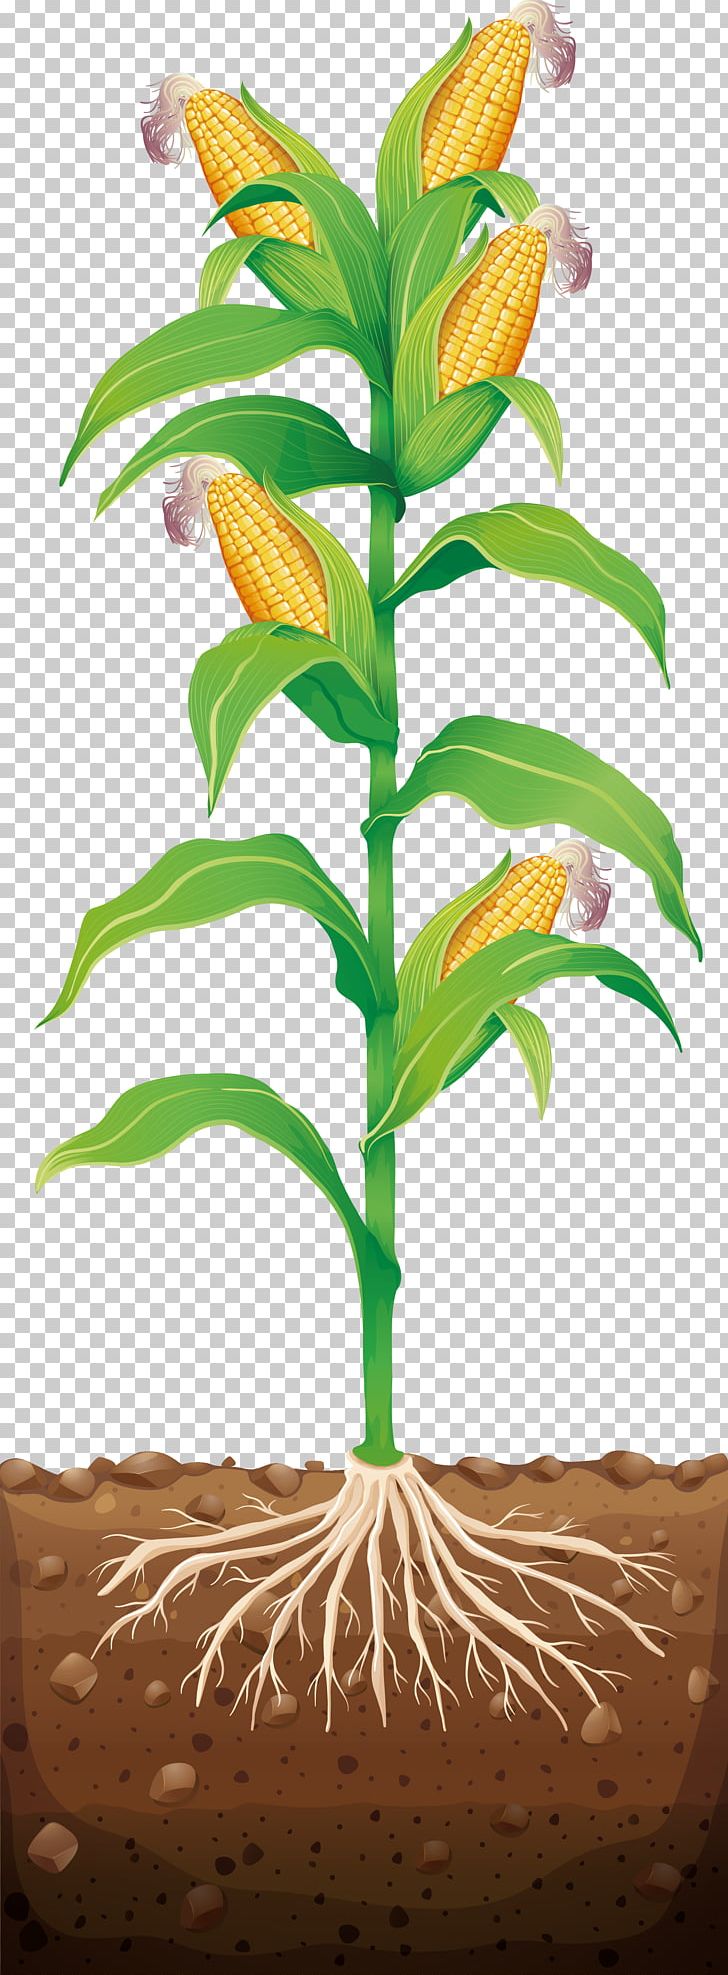 Corn On The Cob Maize Illustration PNG, Clipart, Branch, Corn, Dracaena Fragrans, Flower, Grass Free PNG Download